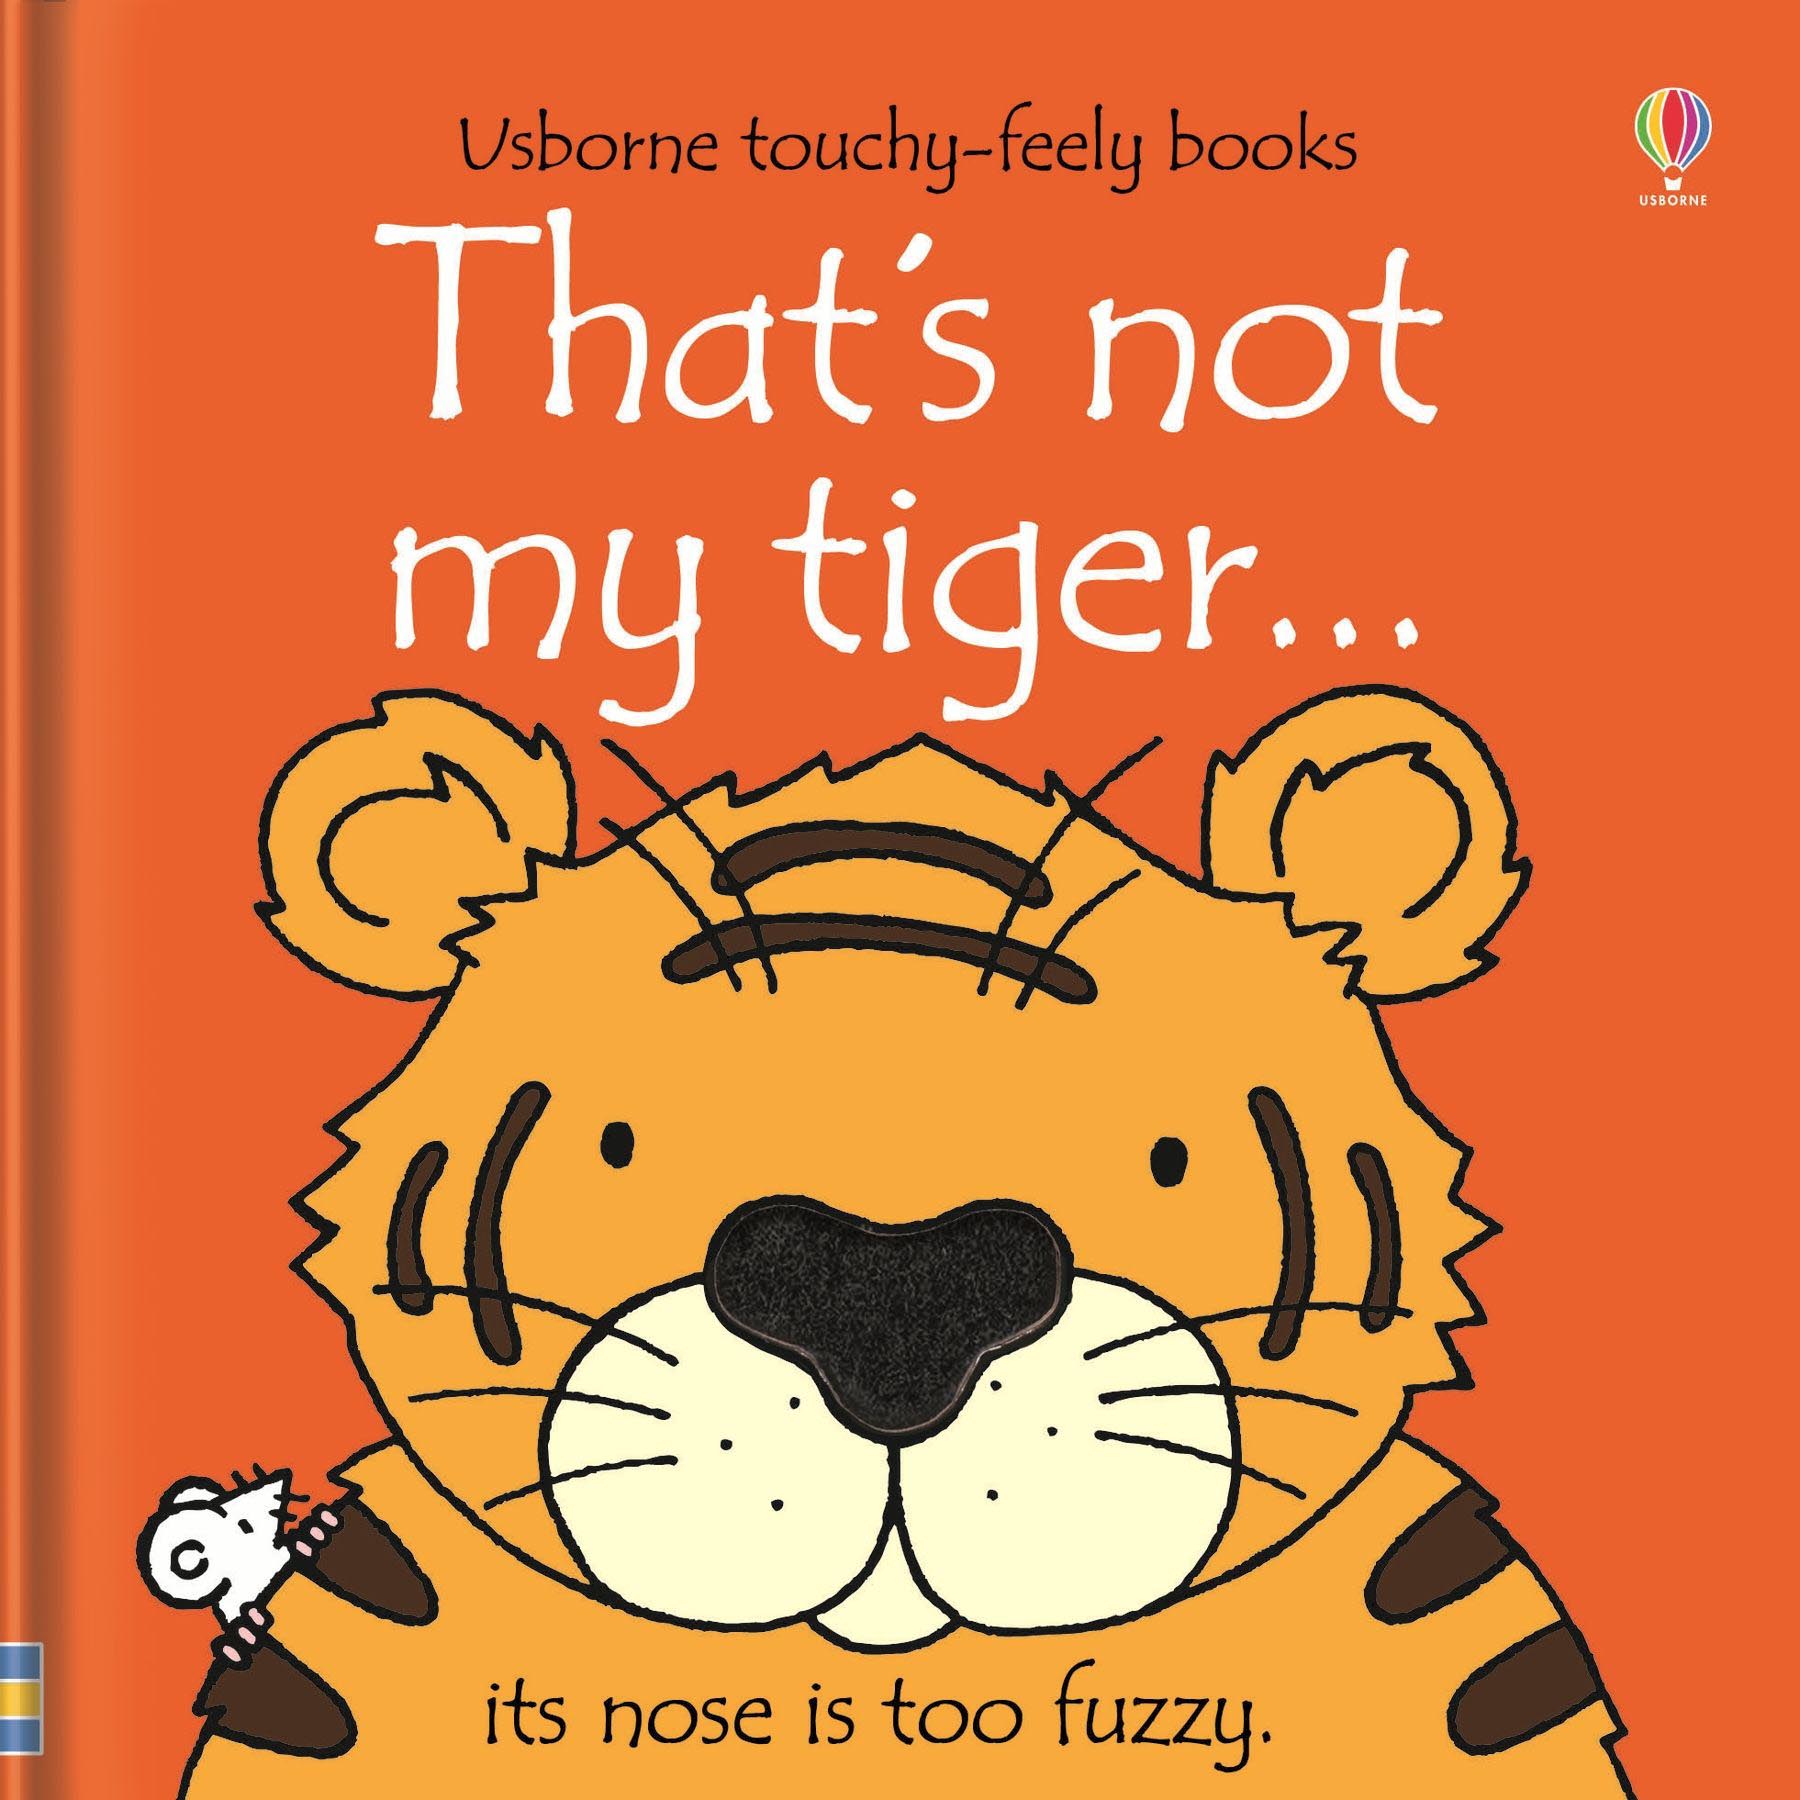 Usborne Touchy Feely Books Thats not my tiger